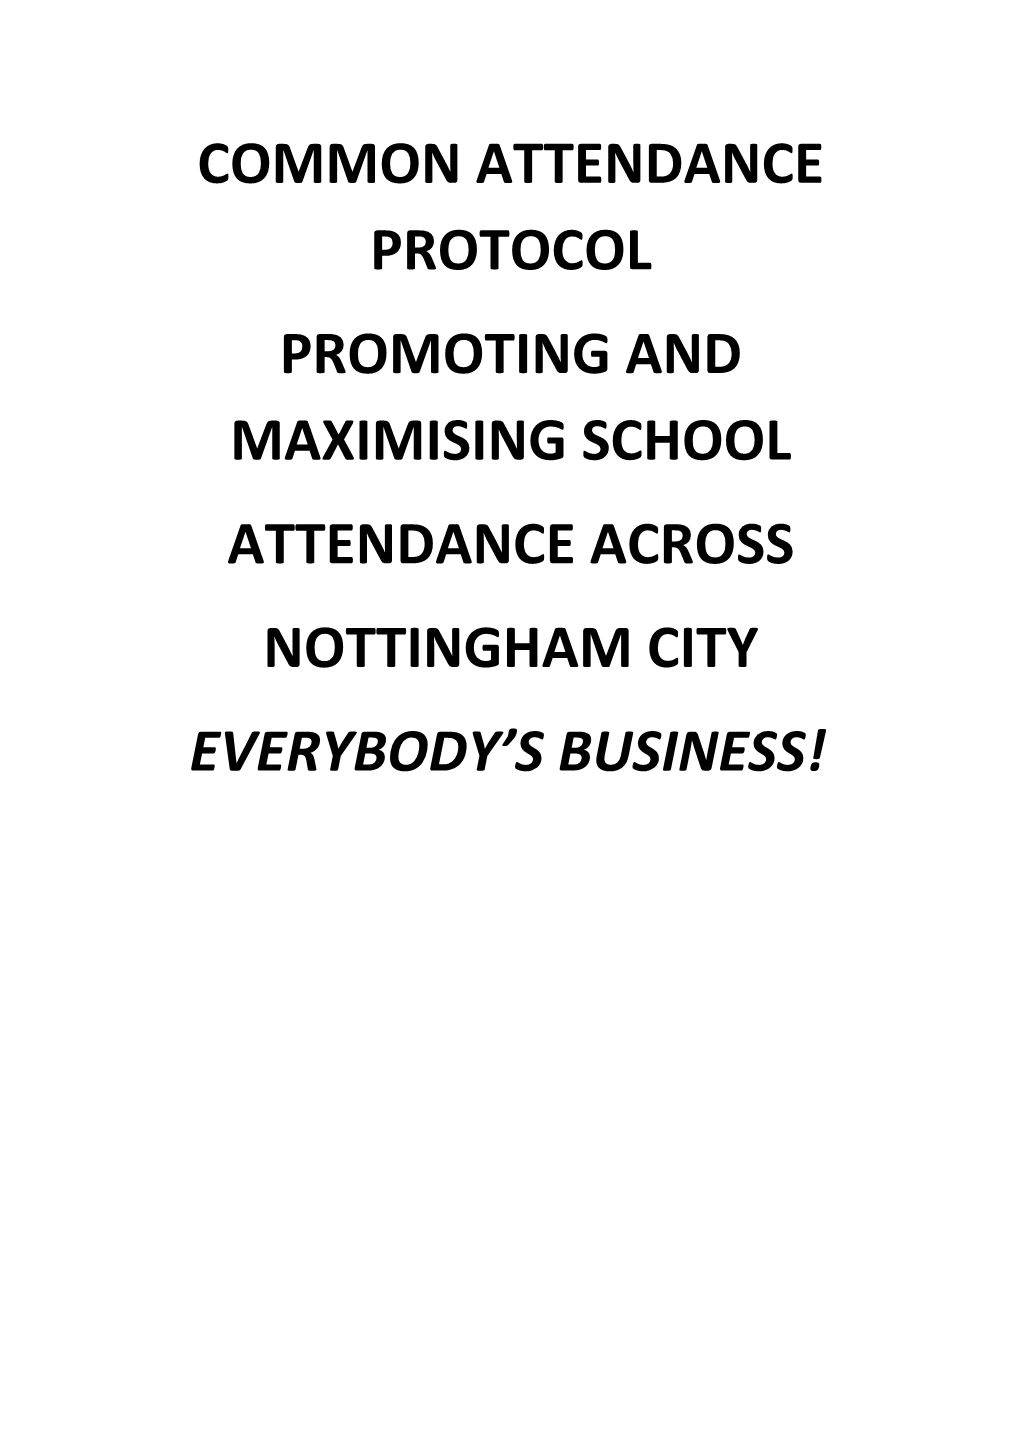 Promoting and Maximising School